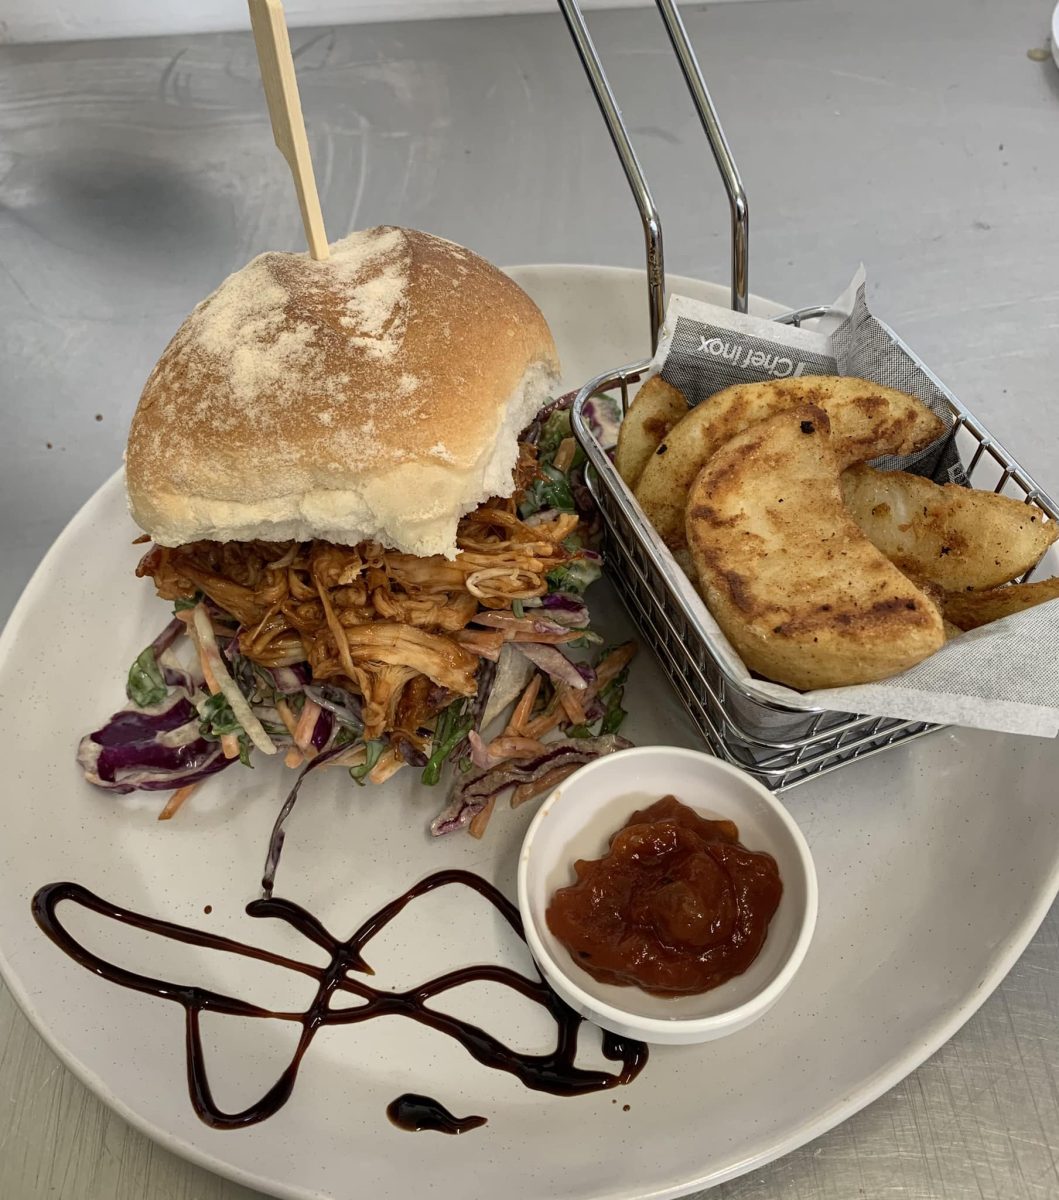 Slow cooked shredded chicken, coleslaw on a damper bun with a side of wedges